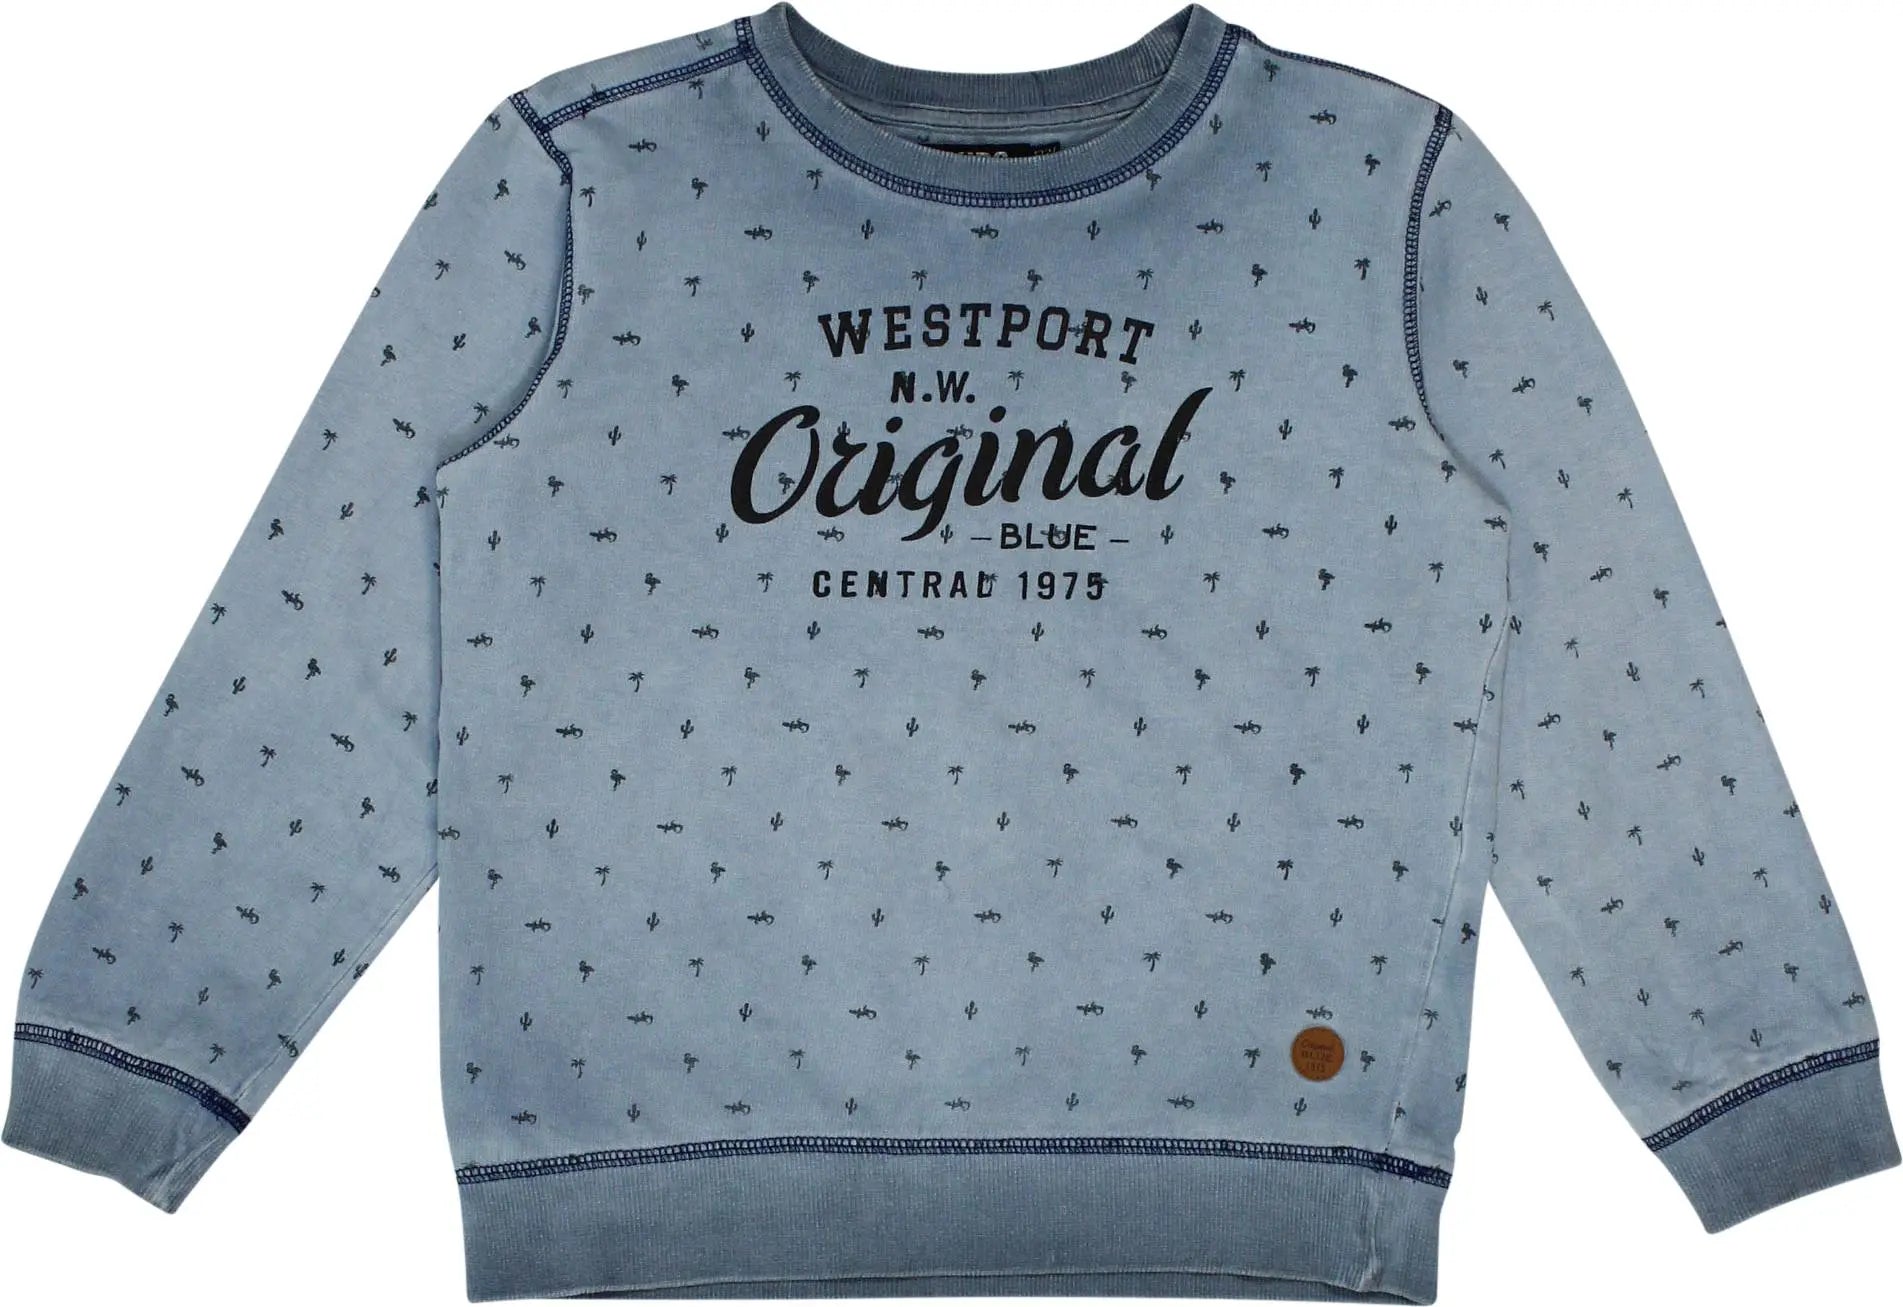 Europe Kids - BLUE14028- ThriftTale.com - Vintage and second handclothing